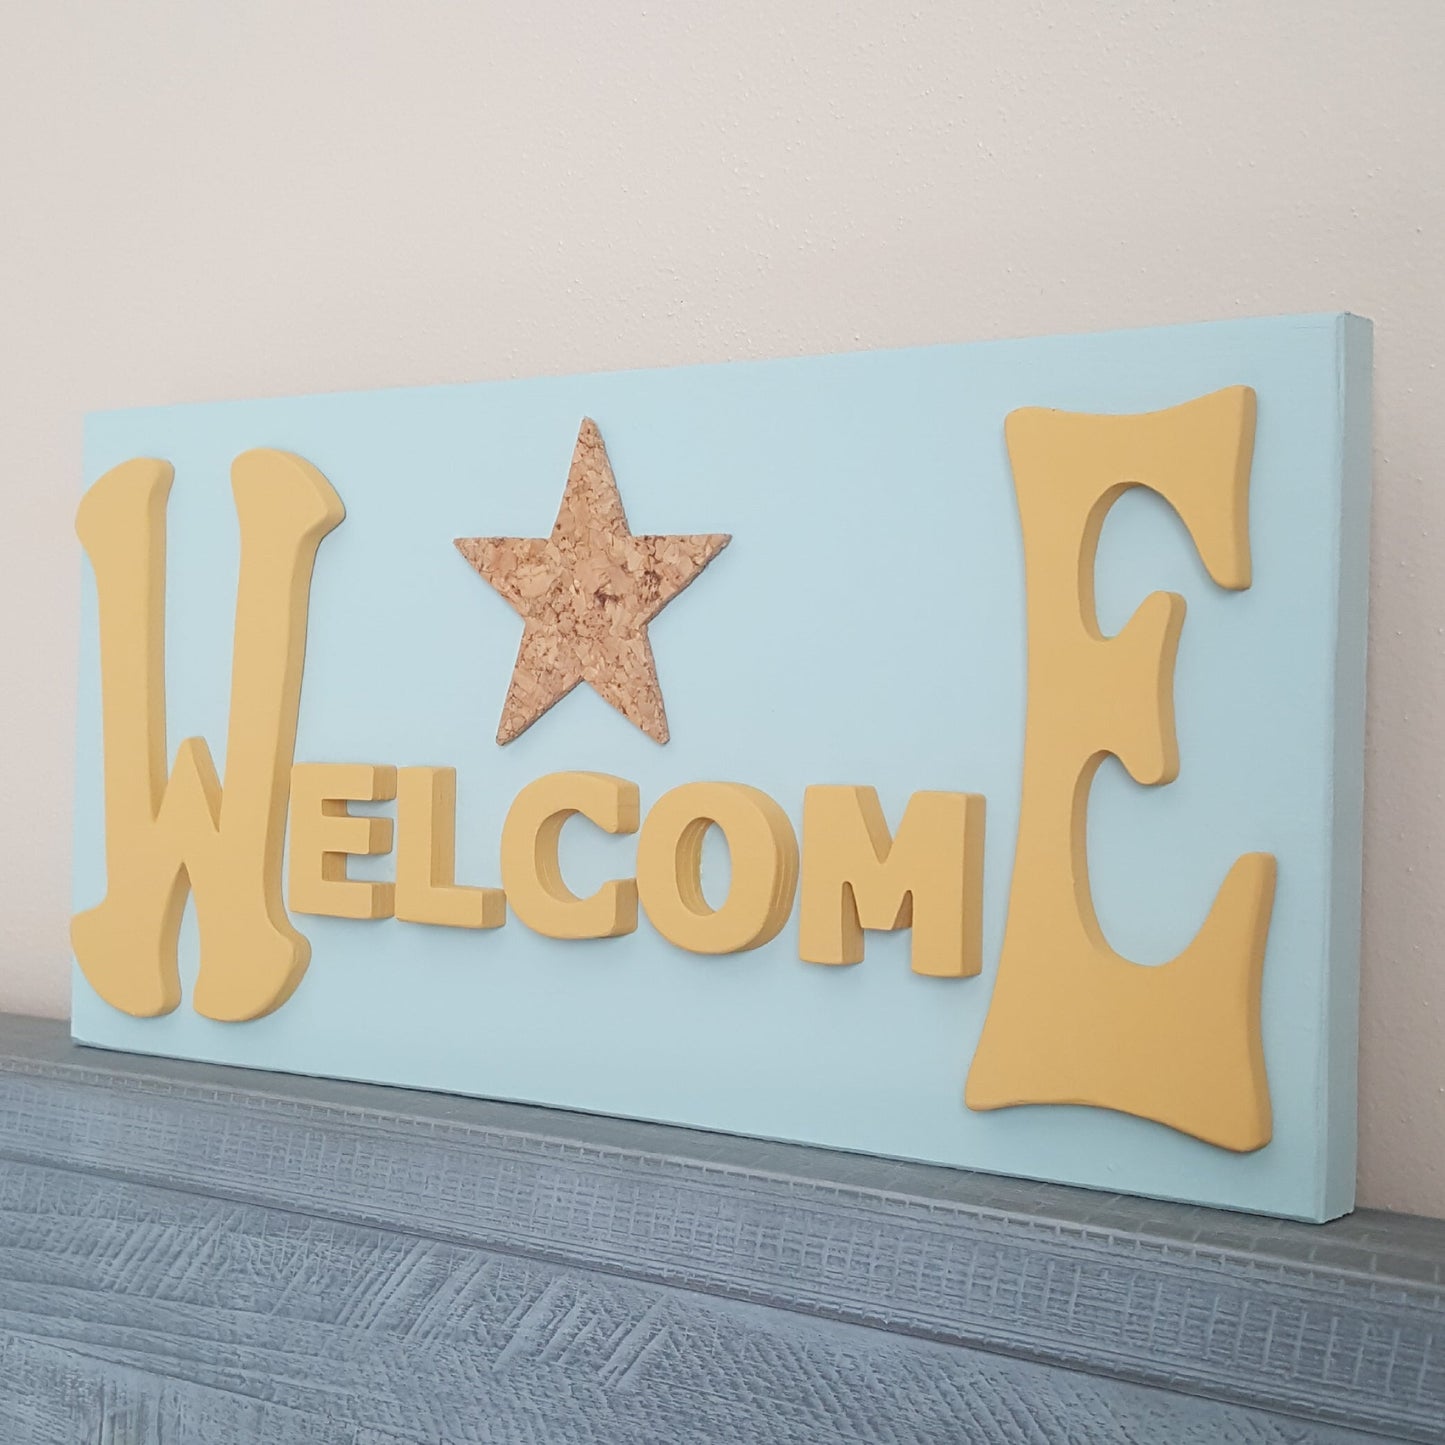 Welcome Wooden Sign-Decor-in2ition mercantile